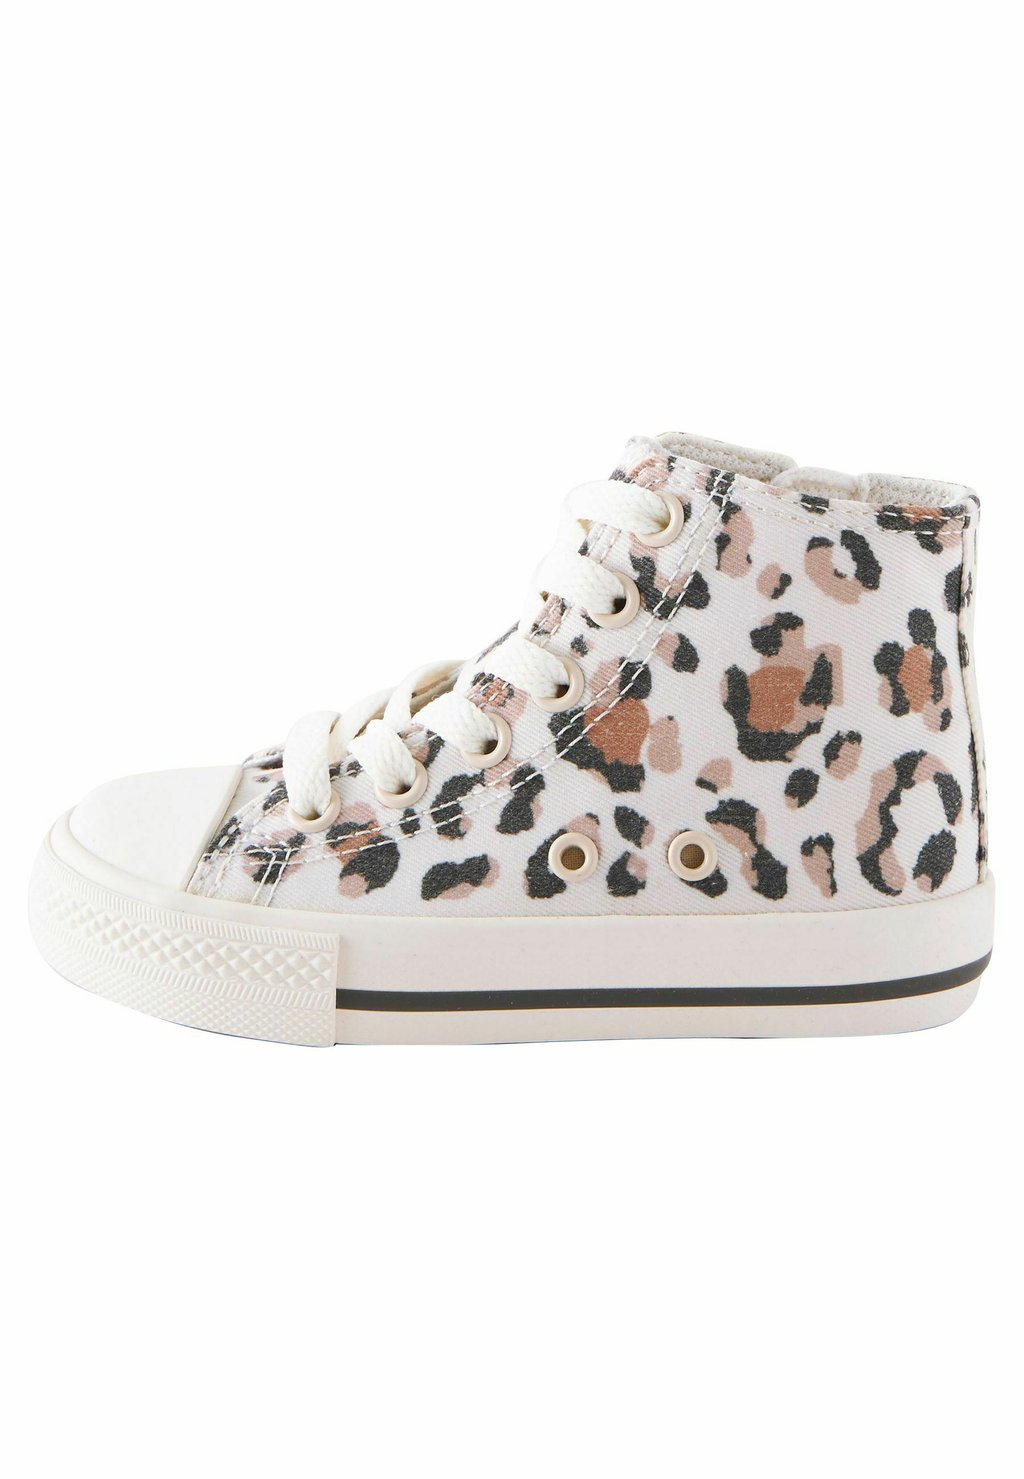 Высокие кроссовки High Top Trainers Fit (For) Next, цвет white tan brown animal print кроссовки next tan perforated trainers brown